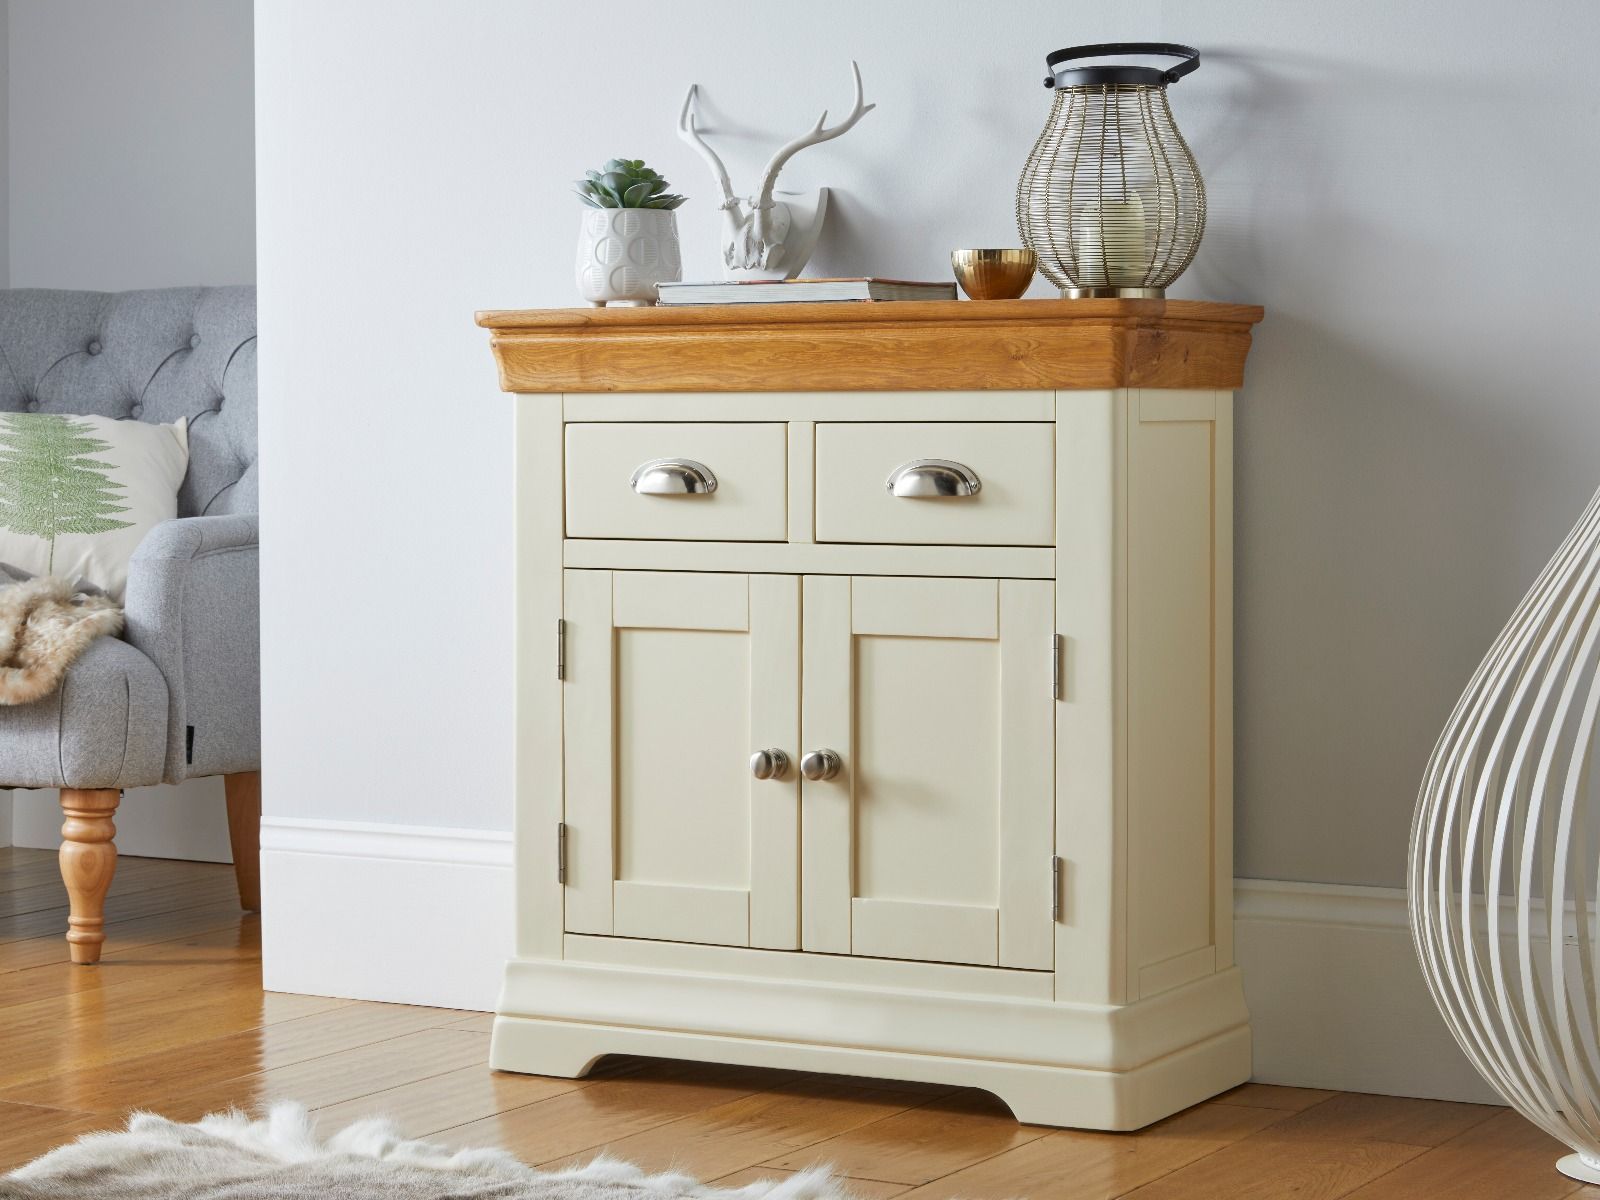 Farmhouse 80cm Cream Painted Small Oak Sideboard - 10% OFF CODE SAVE